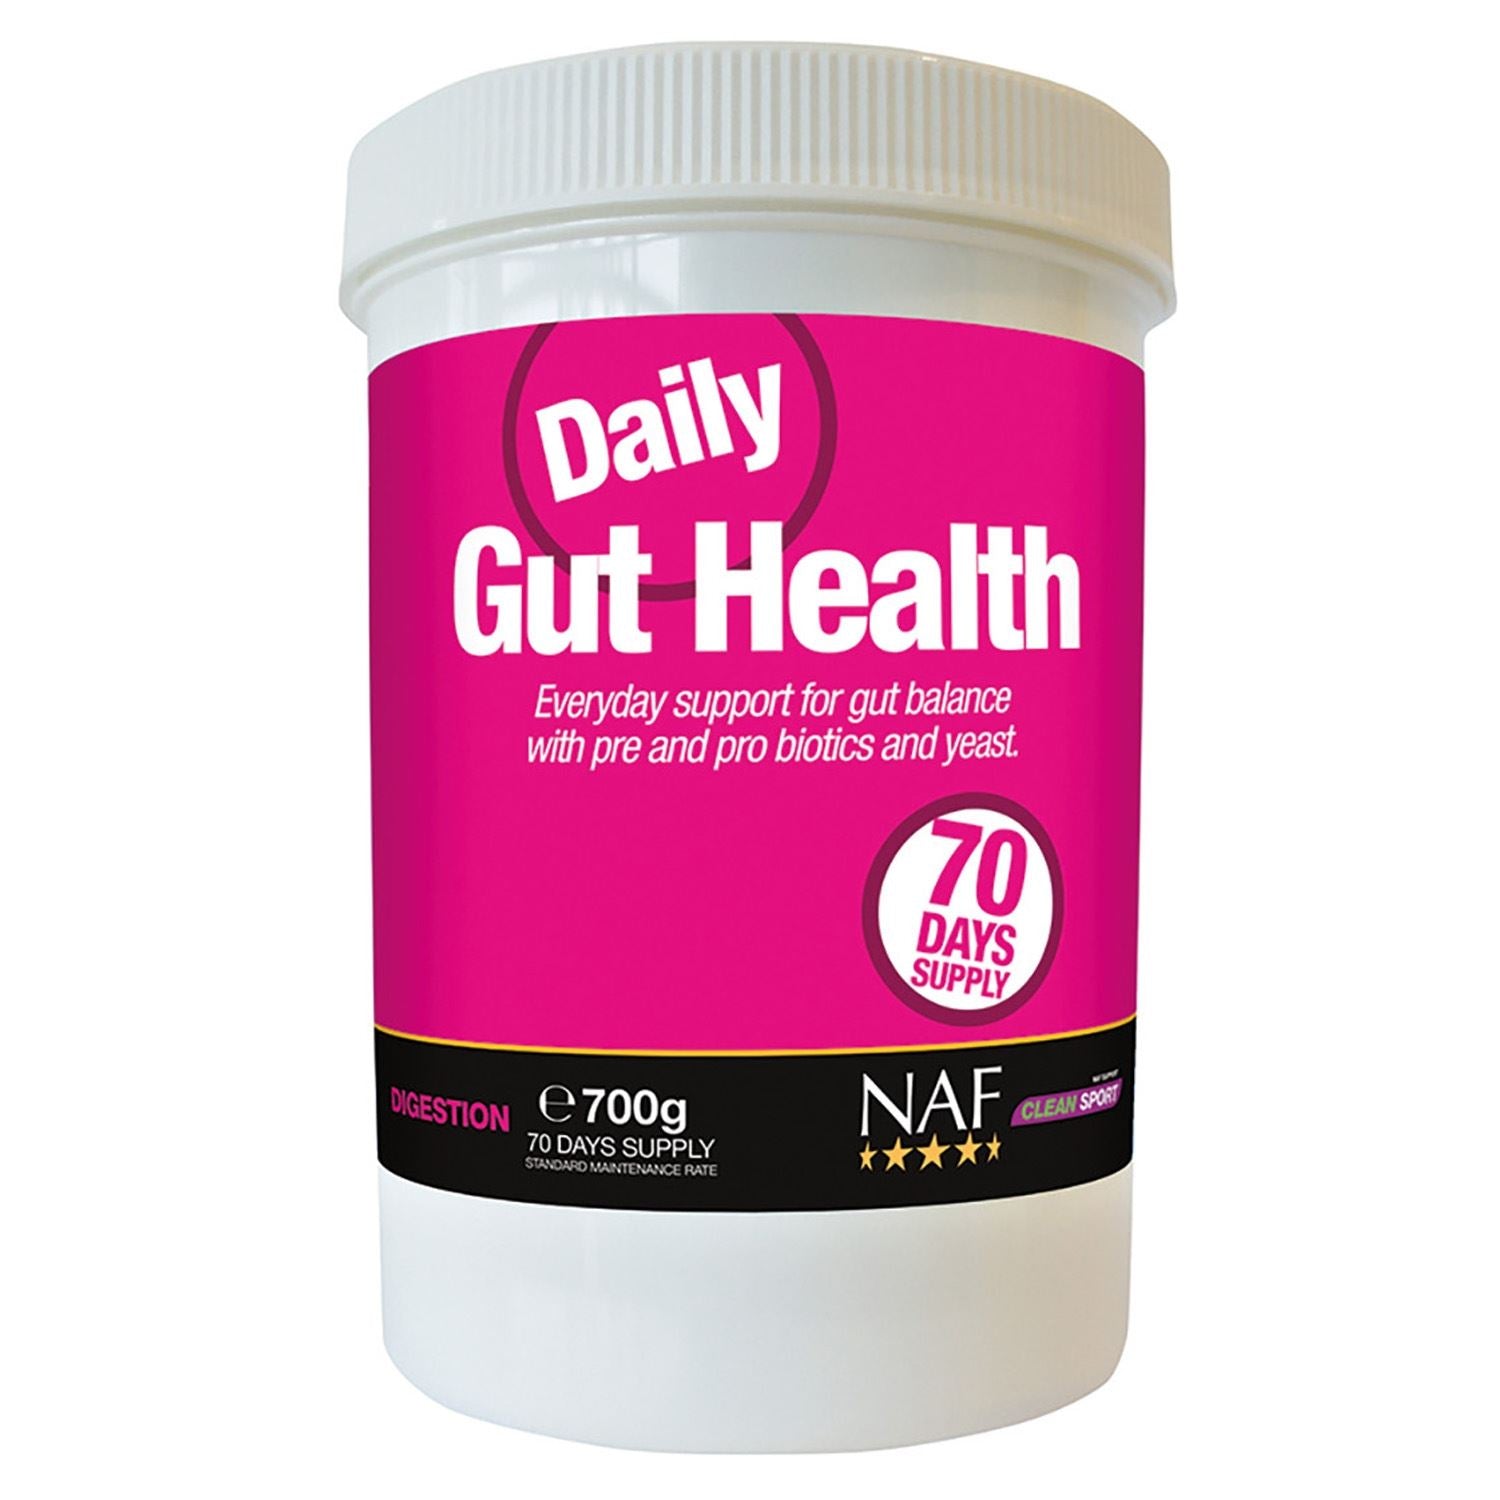 Naf Daily Gut Health - Just Horse Riders